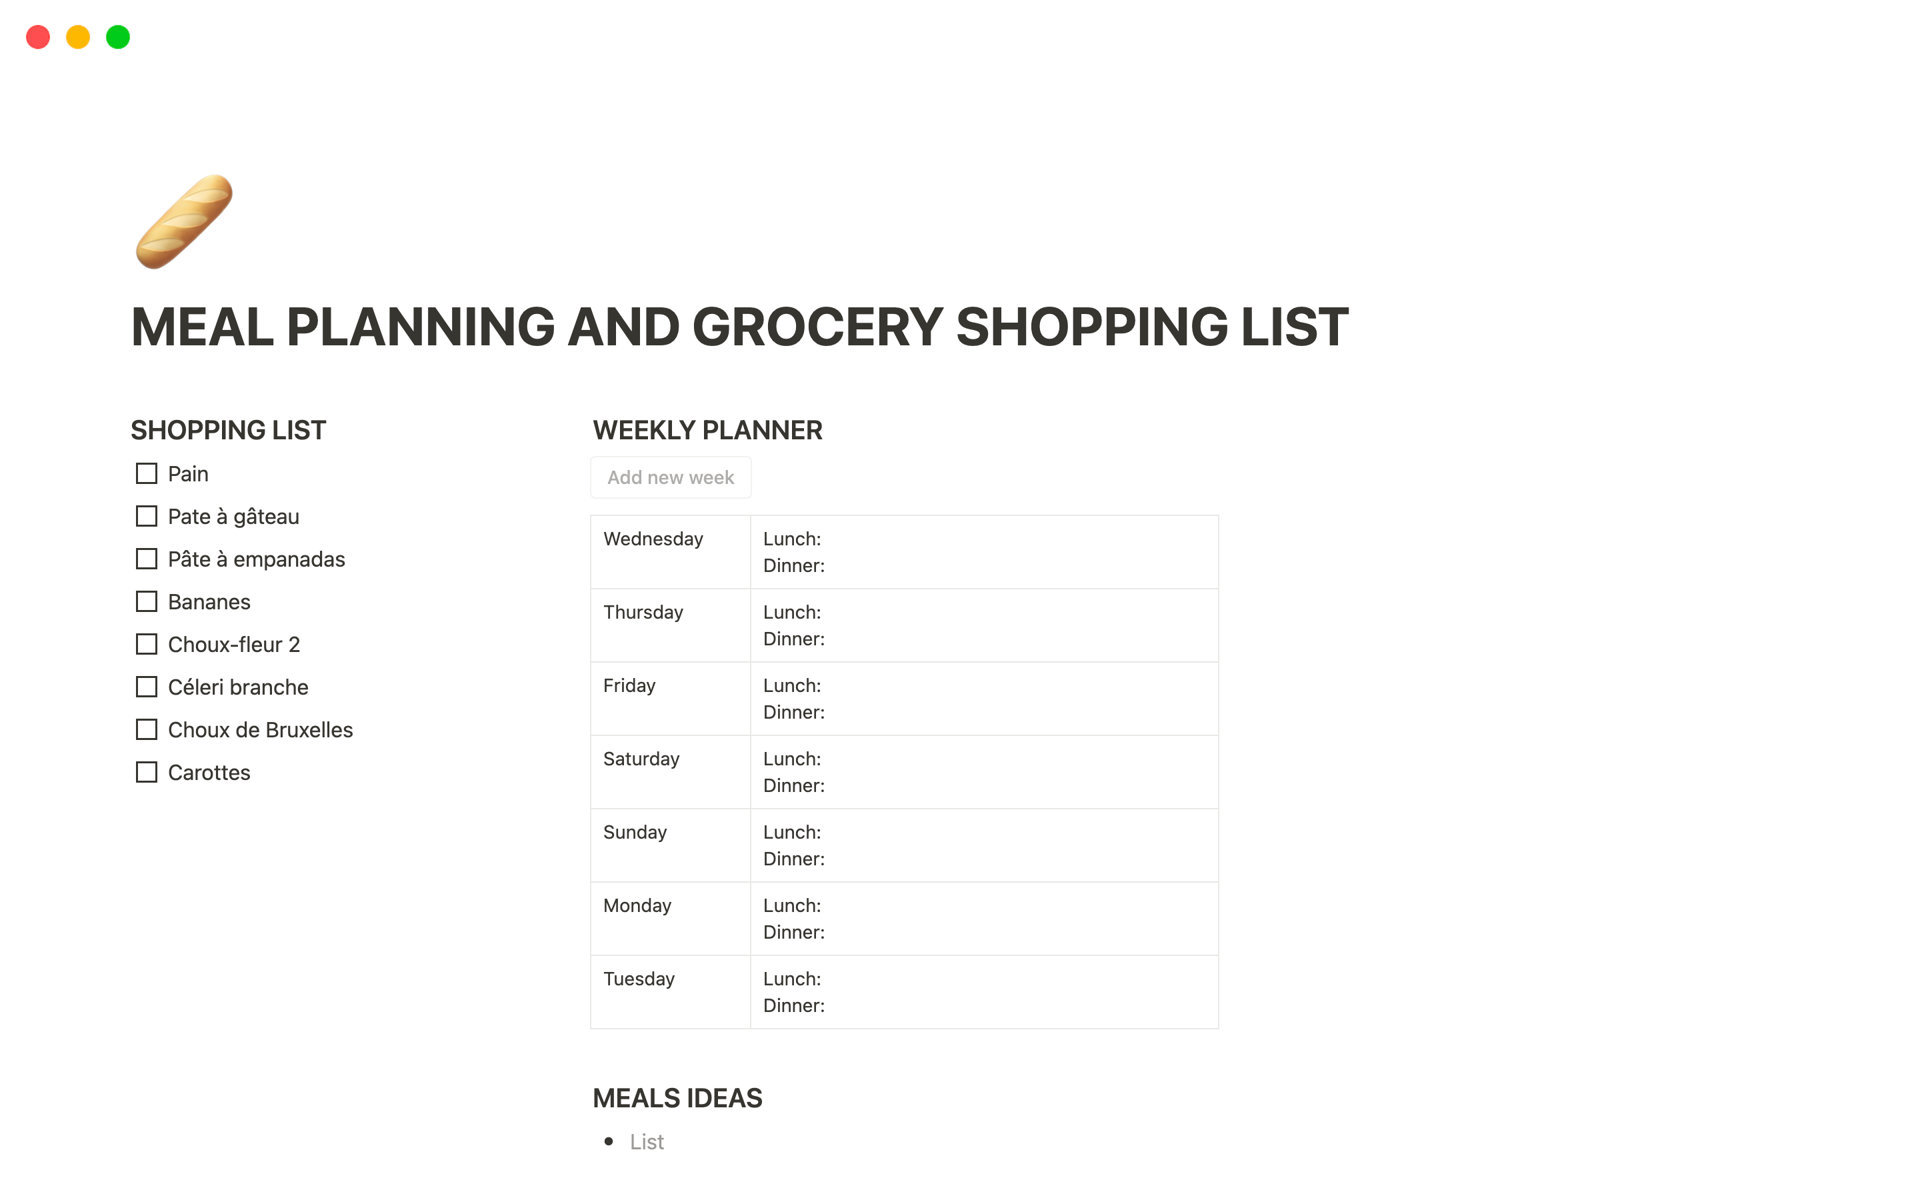 Effortlessly plan your weekly meals, create a corresponding grocery list, and collaborate seamlessly with your household using our Meal Planning Notion Template's intuitive table format and sharing capabilities.